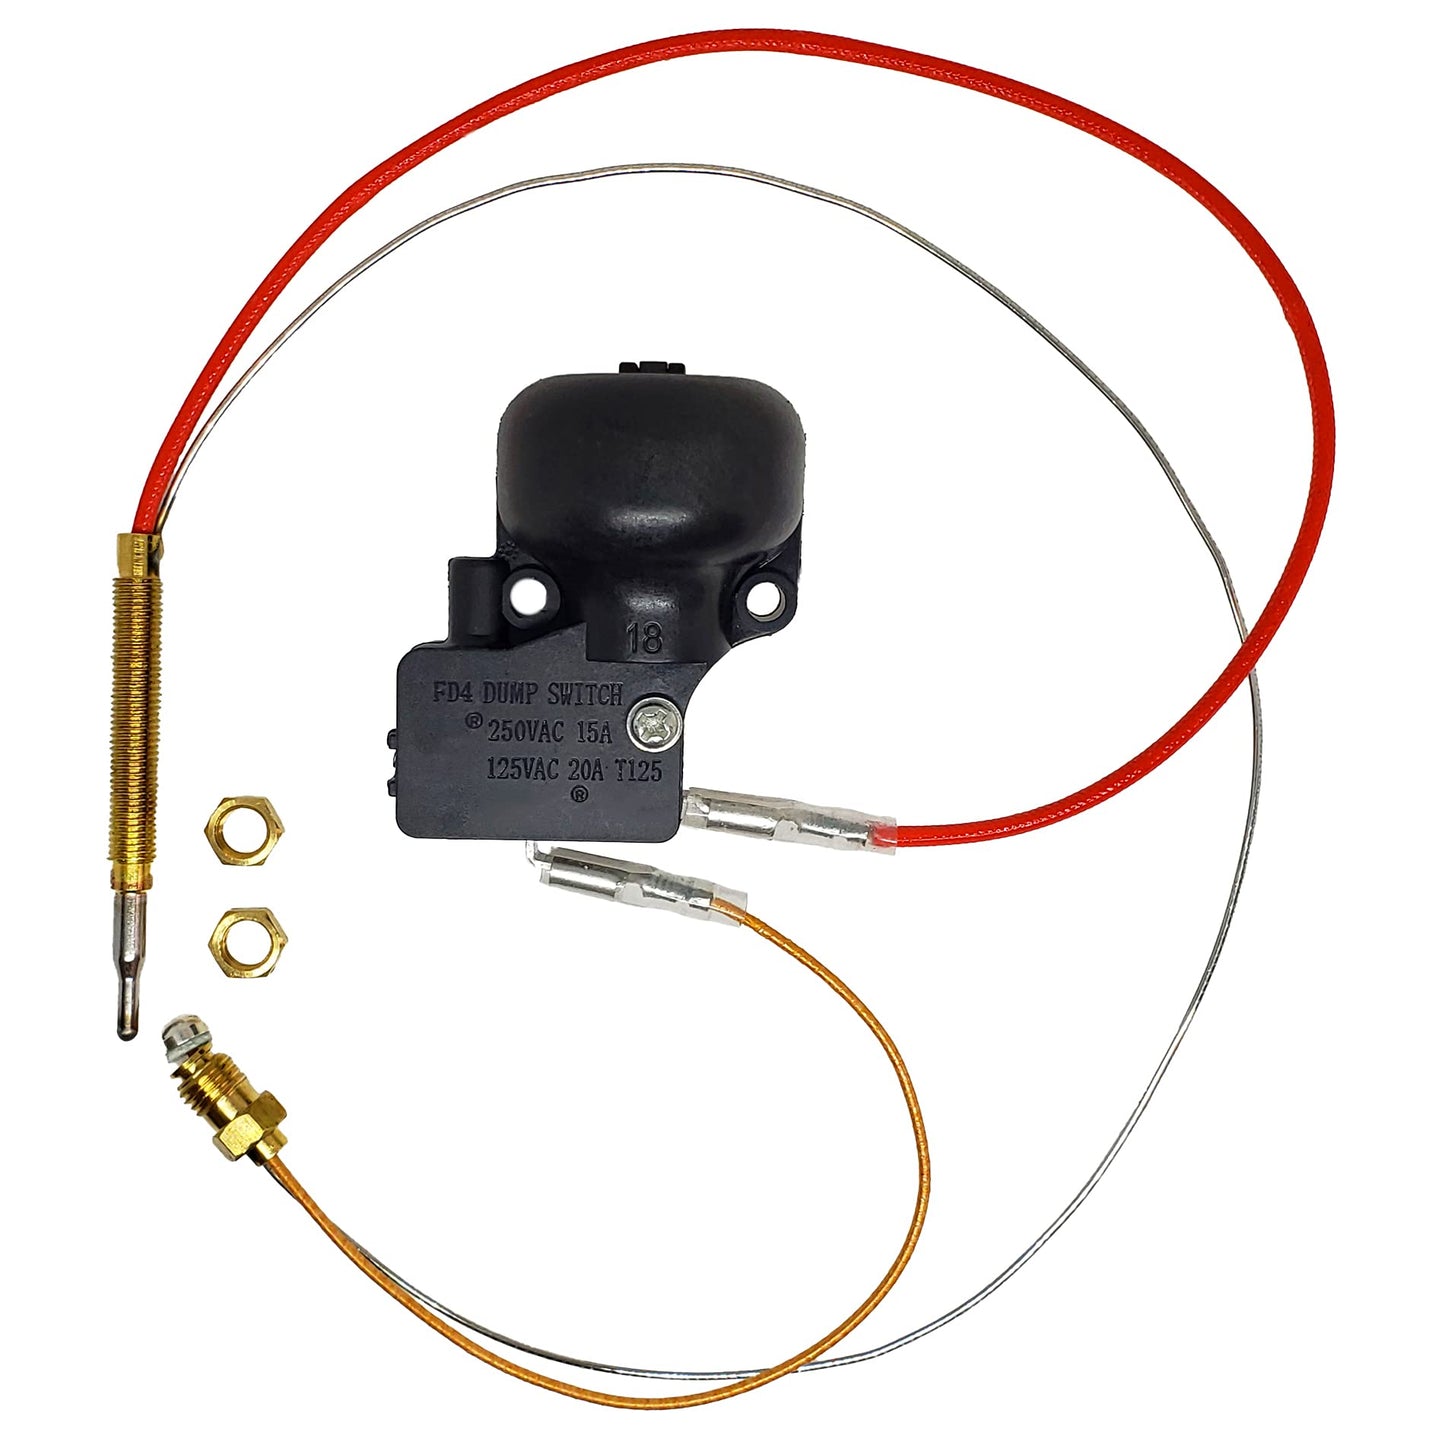 Gas Patio Heater Thermocoupler and Anti Tilt Dump Switch,Patio Heater M60.75 Head Thread With M8X1,M9X1 End Connection Nuts for Patio and Outdoor Heater Accessories